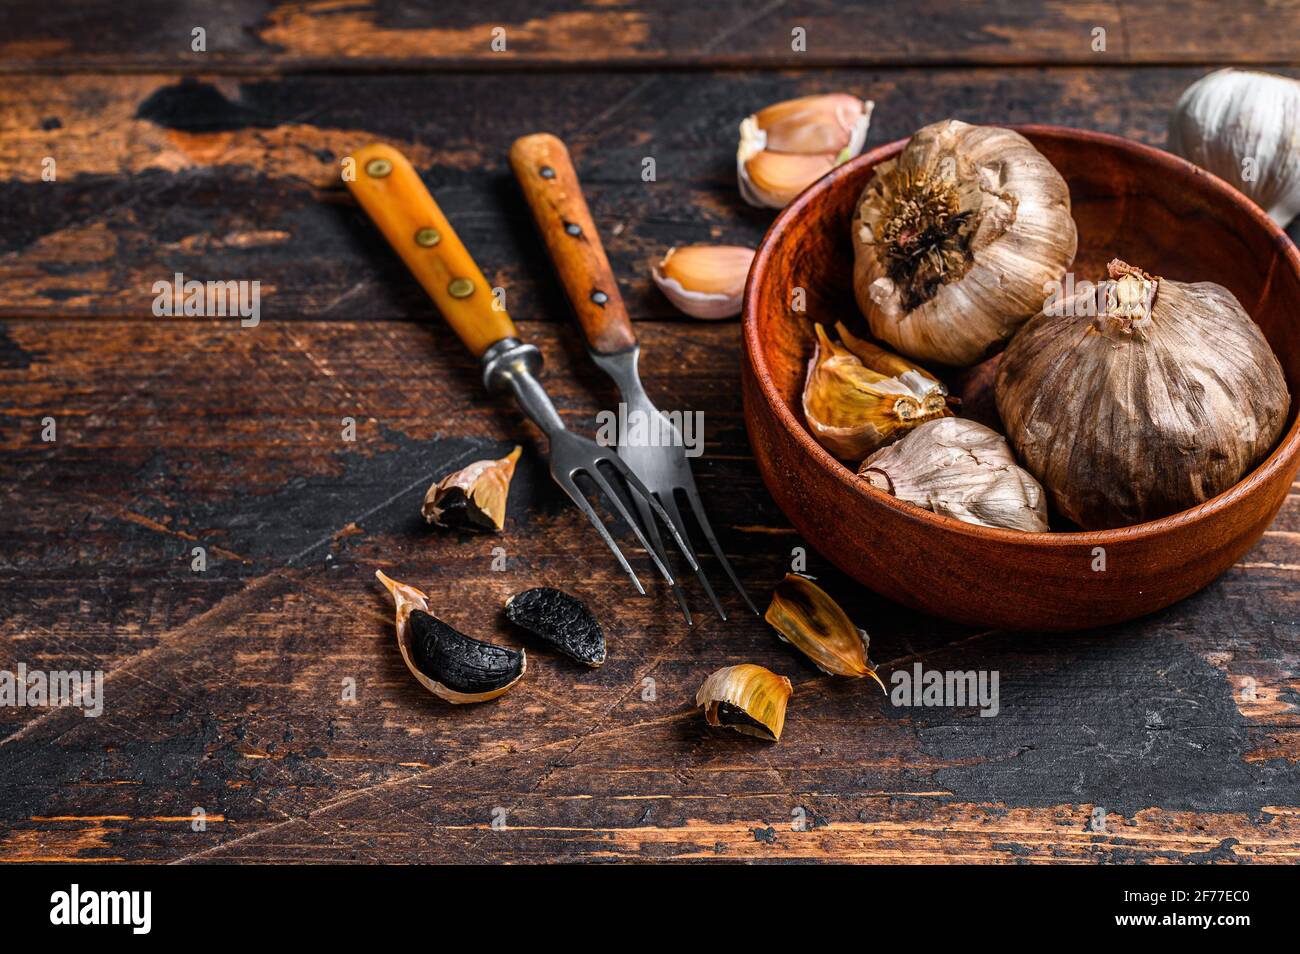 Bulbs and cloves of fermented black garlic in a plate. Dark wooden background. Top view. Copy space Stockfoto